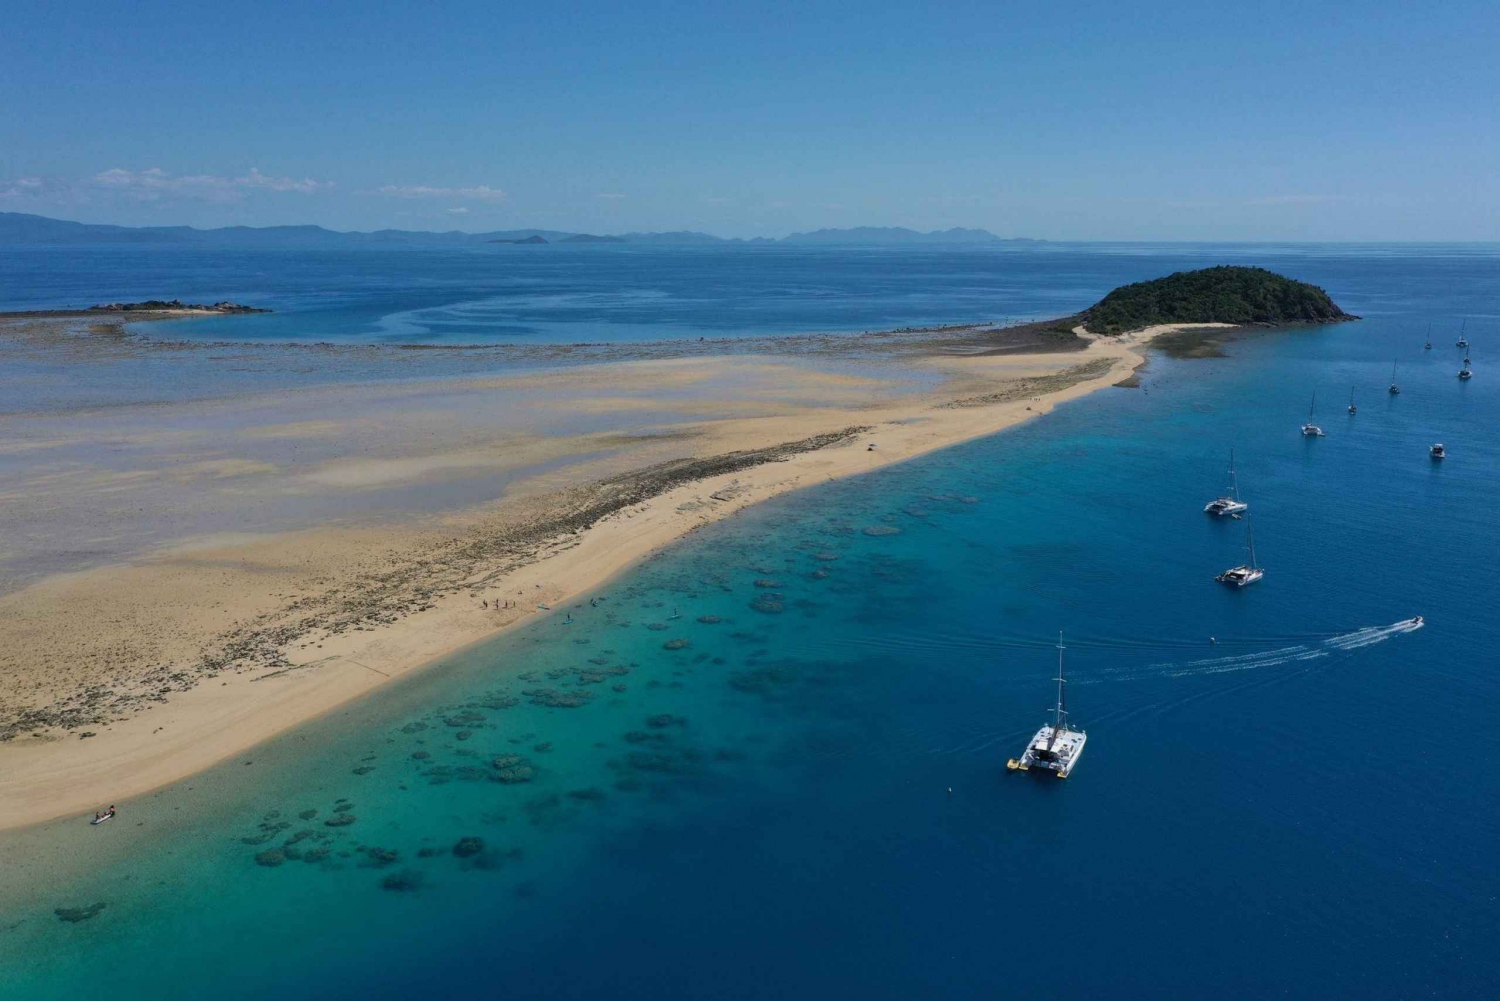 Airlie Beach: Whitsunday Island Sail, SUP & Snorkel Day Tour